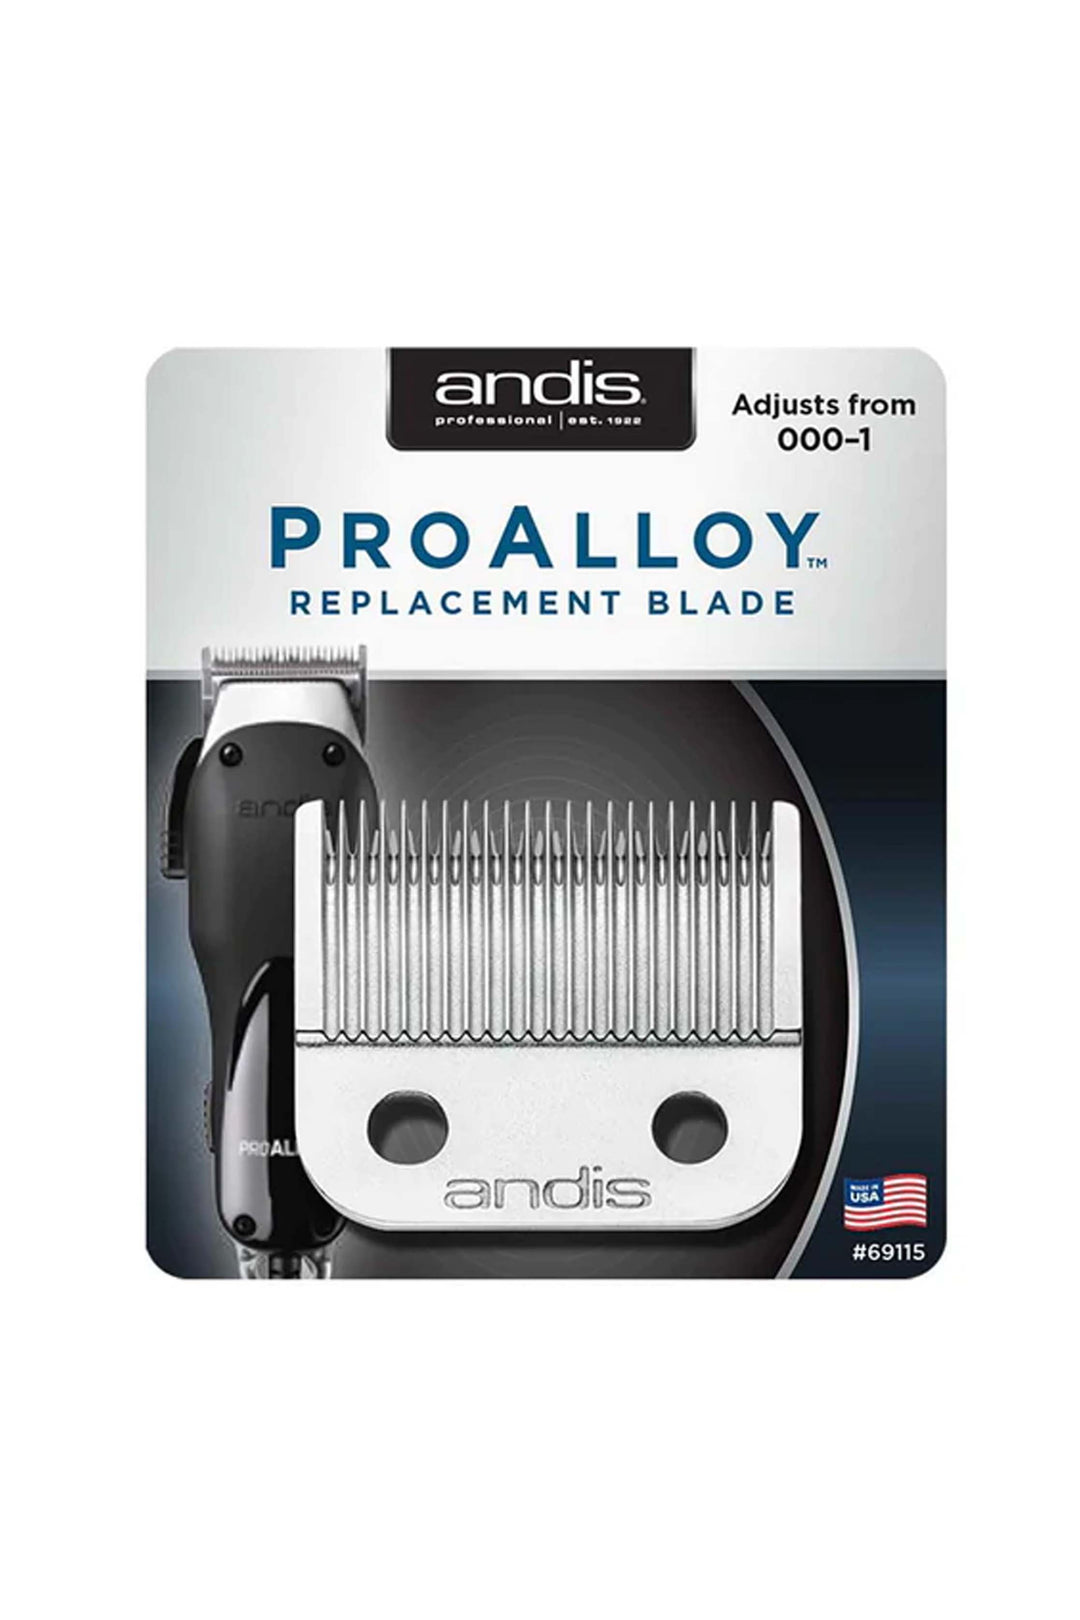 ANDIS PRO ALLOY REPLACEMENT BLADE